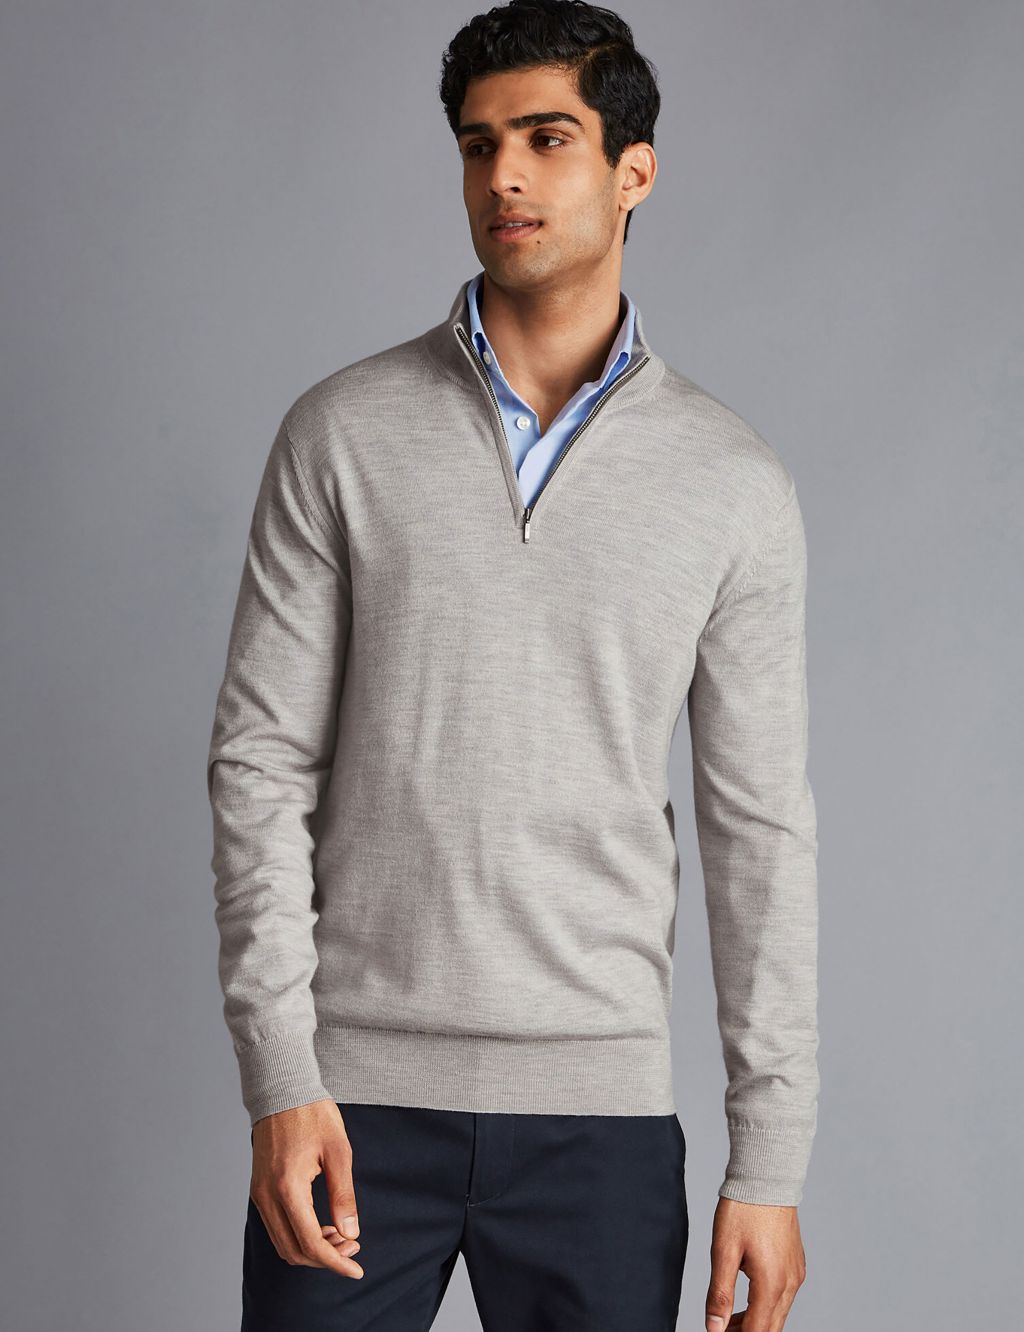 Men's Half-Zip Knitwear Available at M&S